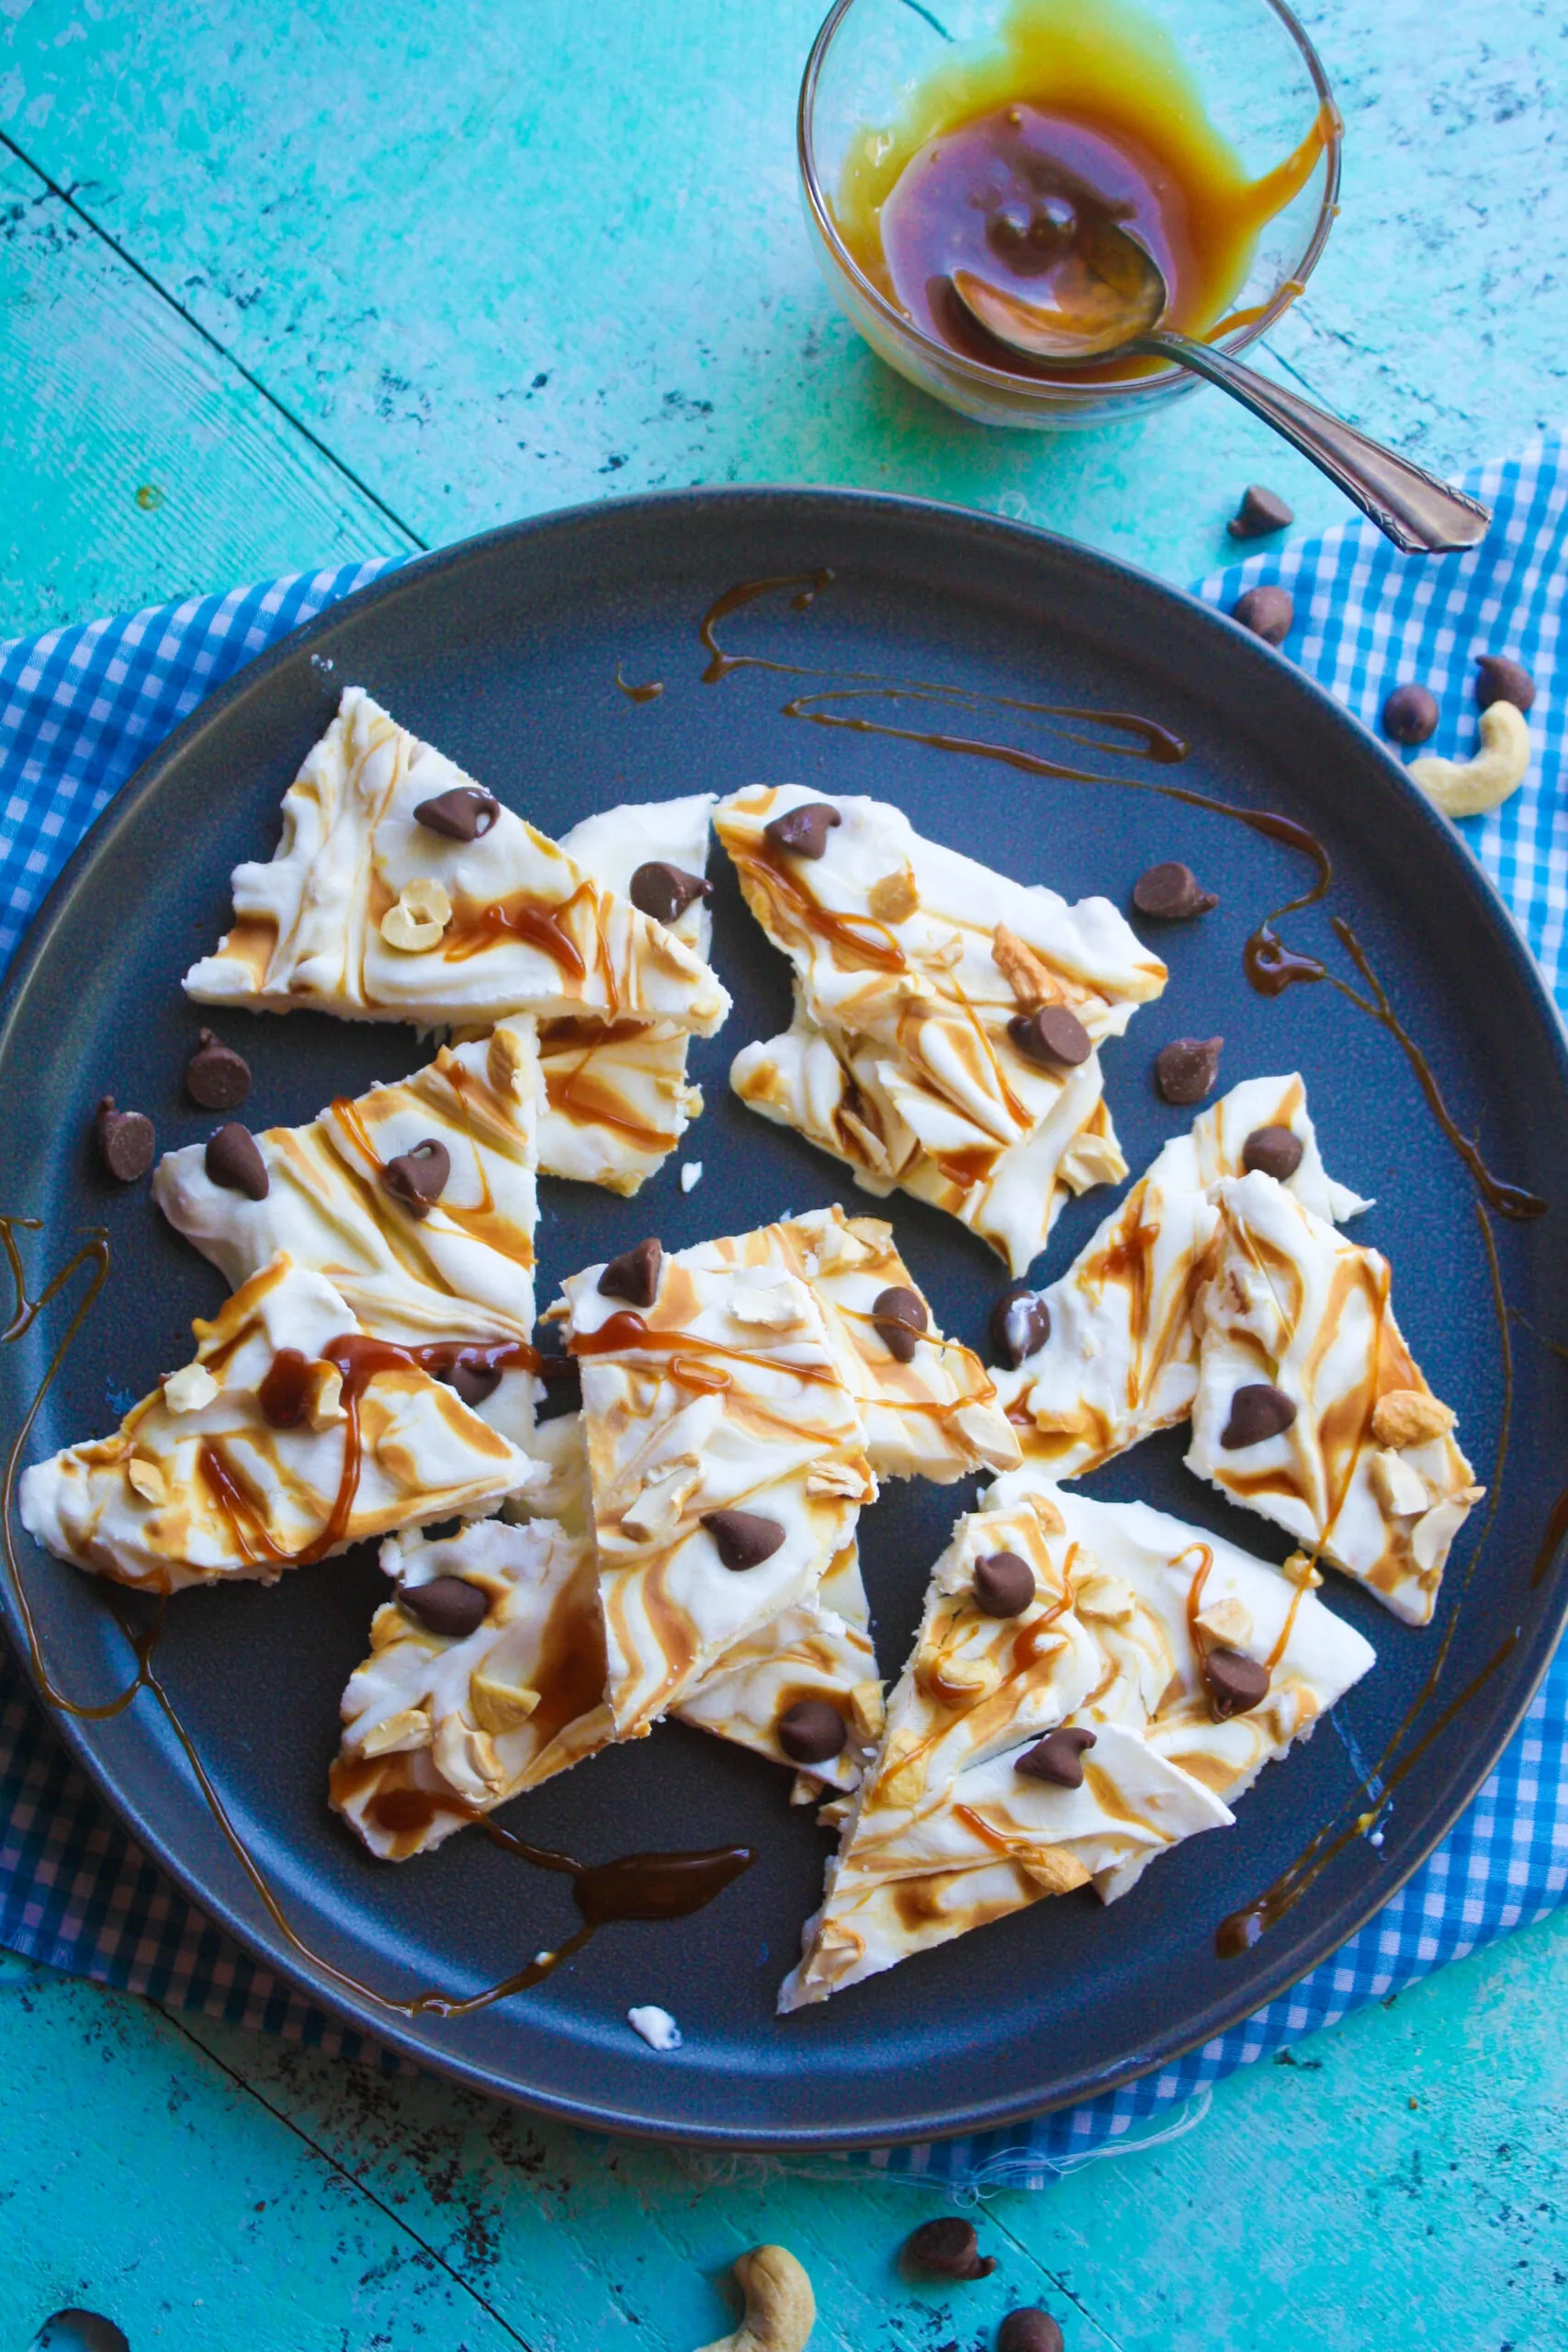 Frozen Yogurt Bark with Caramel, Cashews and Chocolate is an ideal dessert that's creamy and delicious!